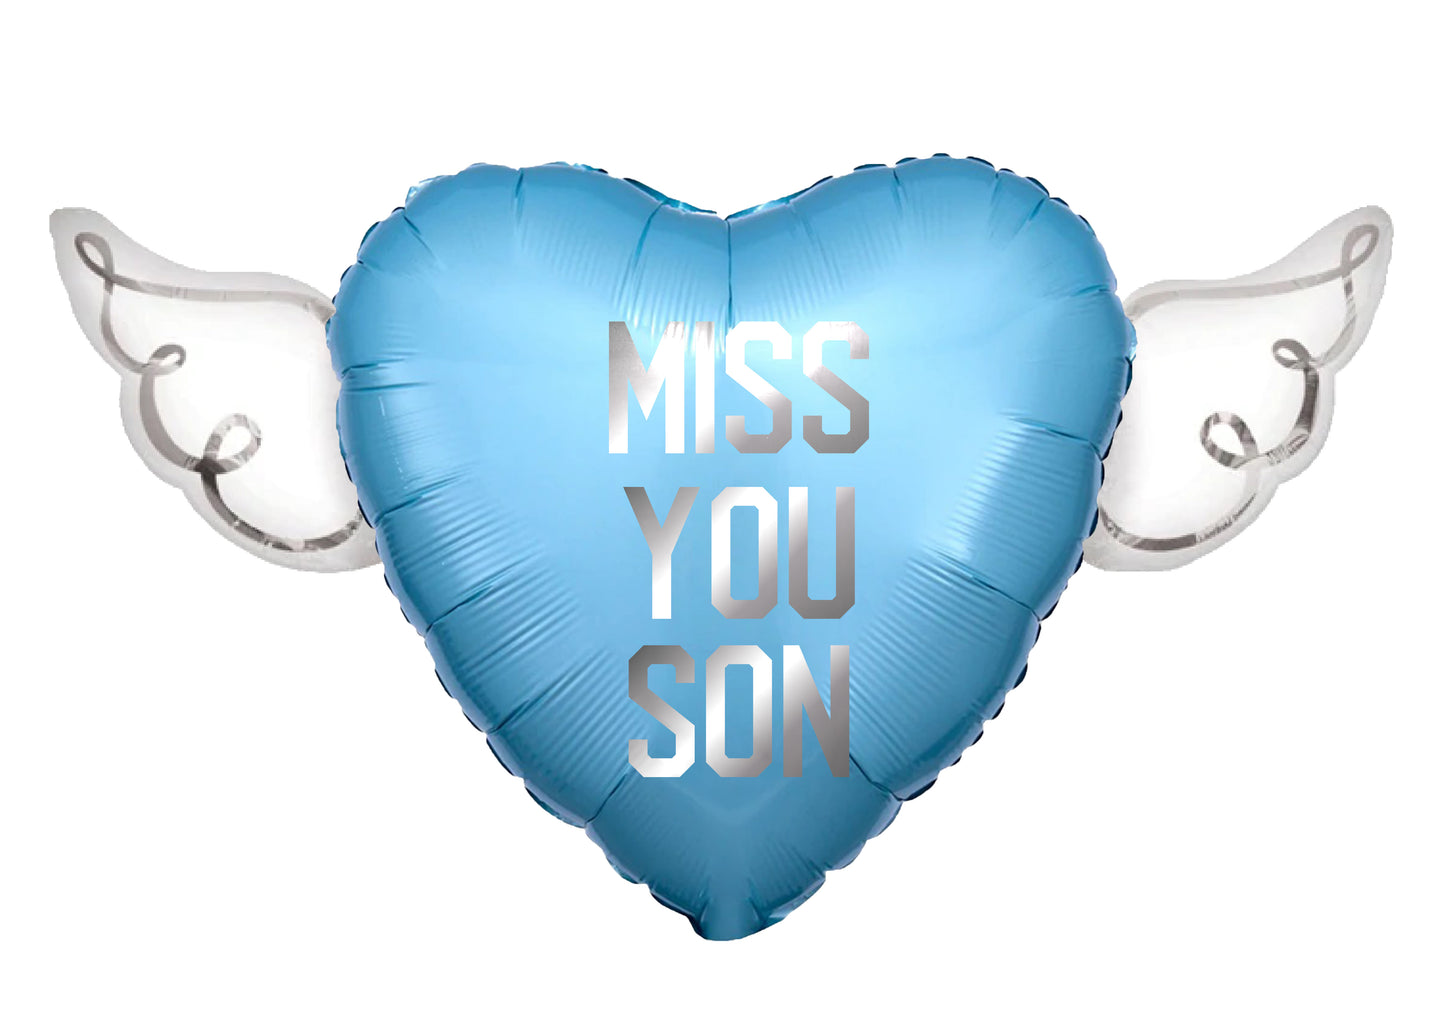 Miss You Son Heavenly Balloons Heart Shaped with angel wings (Blue)